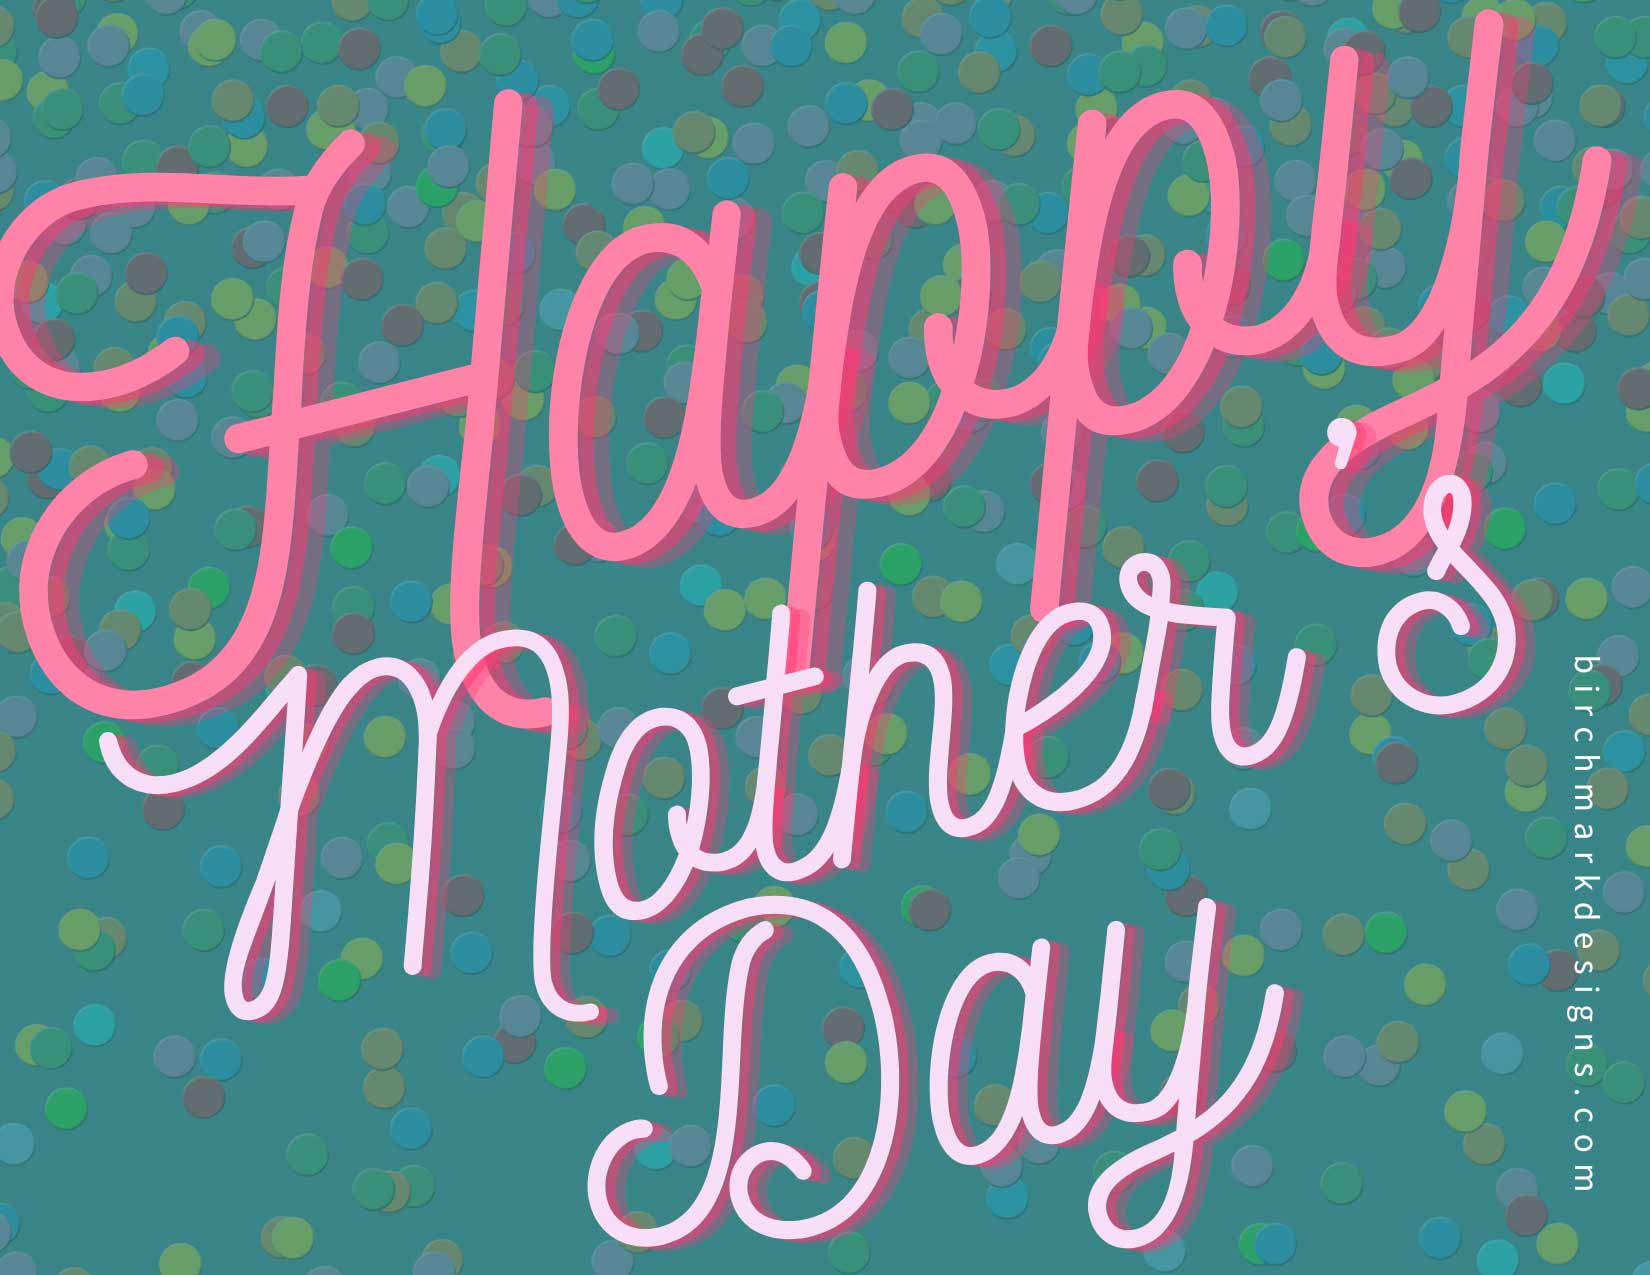 Mother's Day E-Gift Card